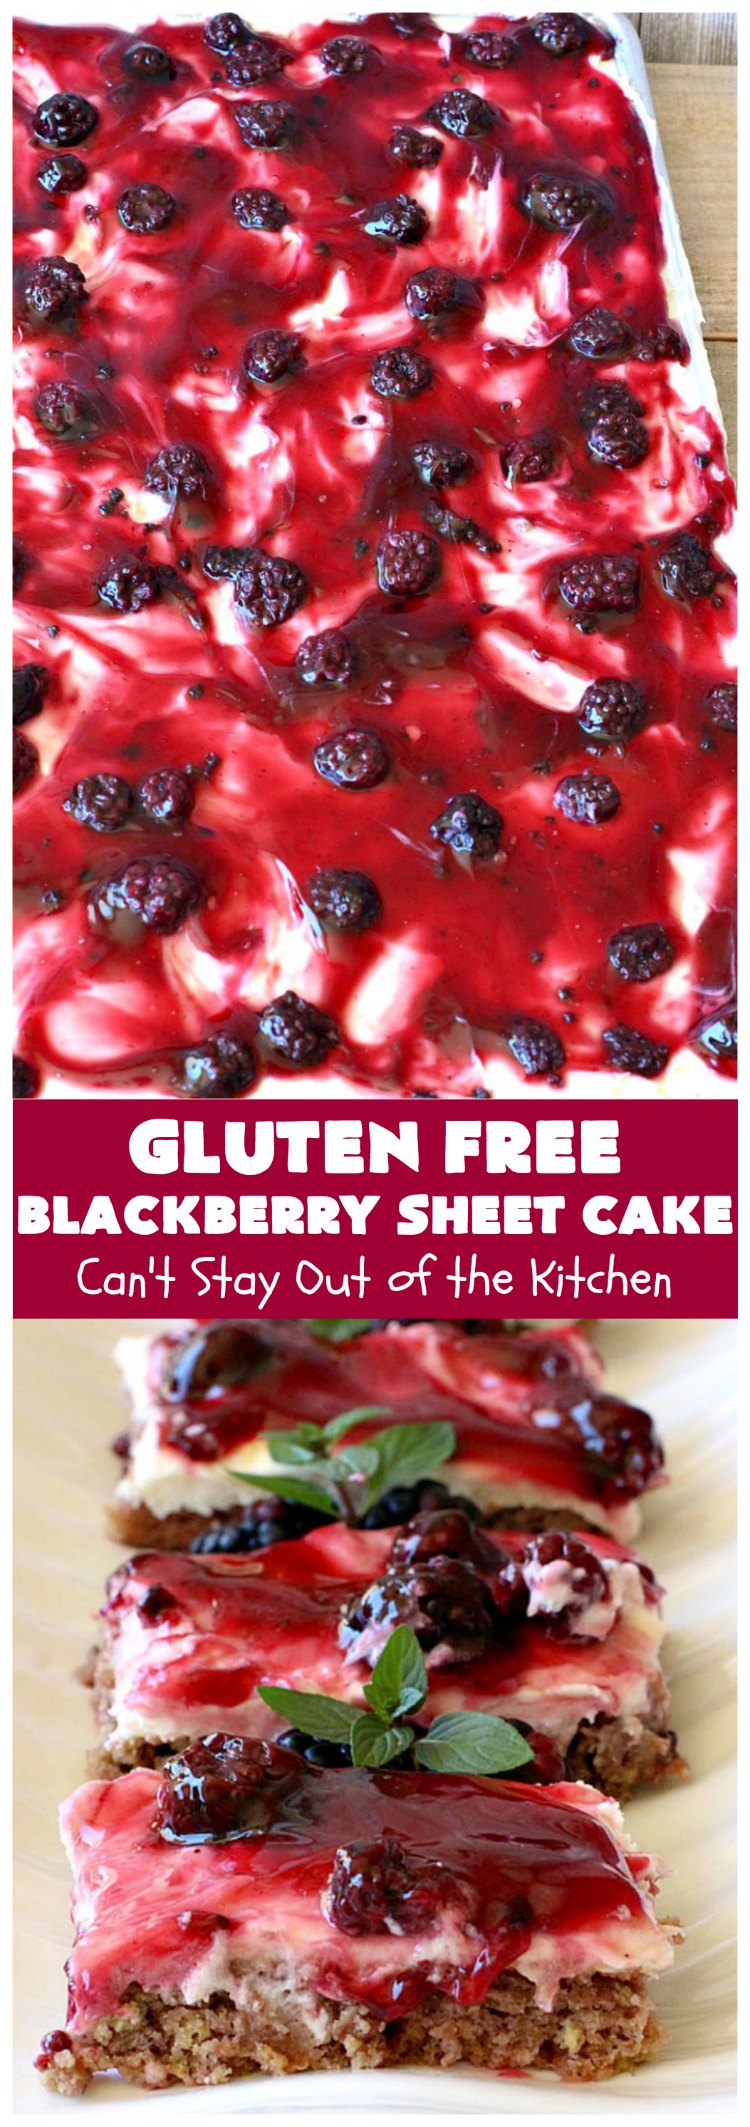 Gluten Free Blackberry Sheet Cake | Can't Stay Out of the Kitchen